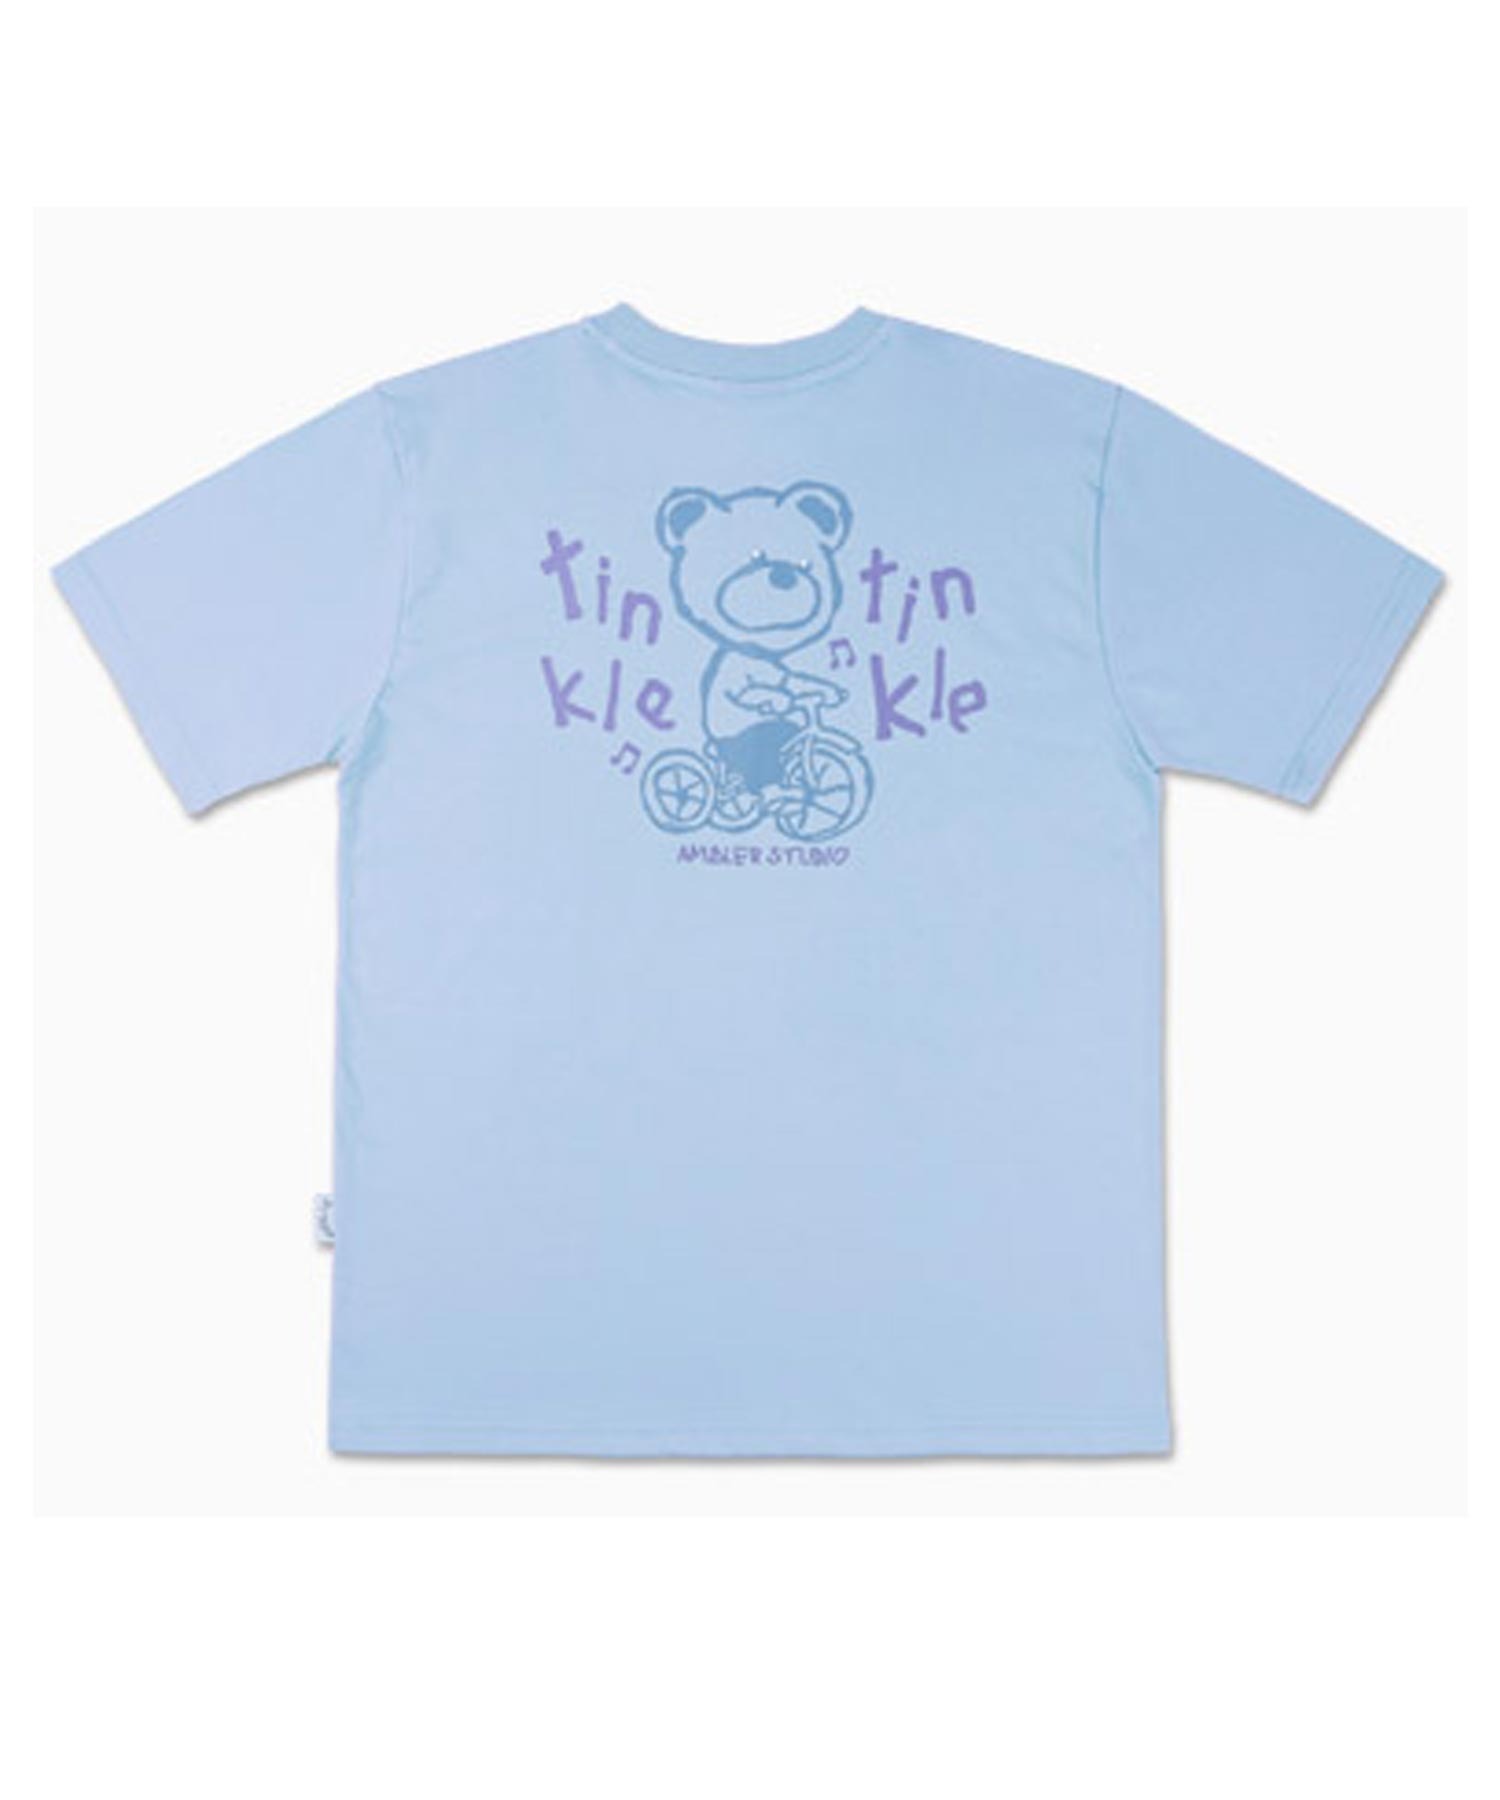 ambler エムブラー Over fit バックプリント 'Tinkle-Tinkle' T-Shirts オーバーのアイテム取扱☆ 訳あり 半袖Tシャツ